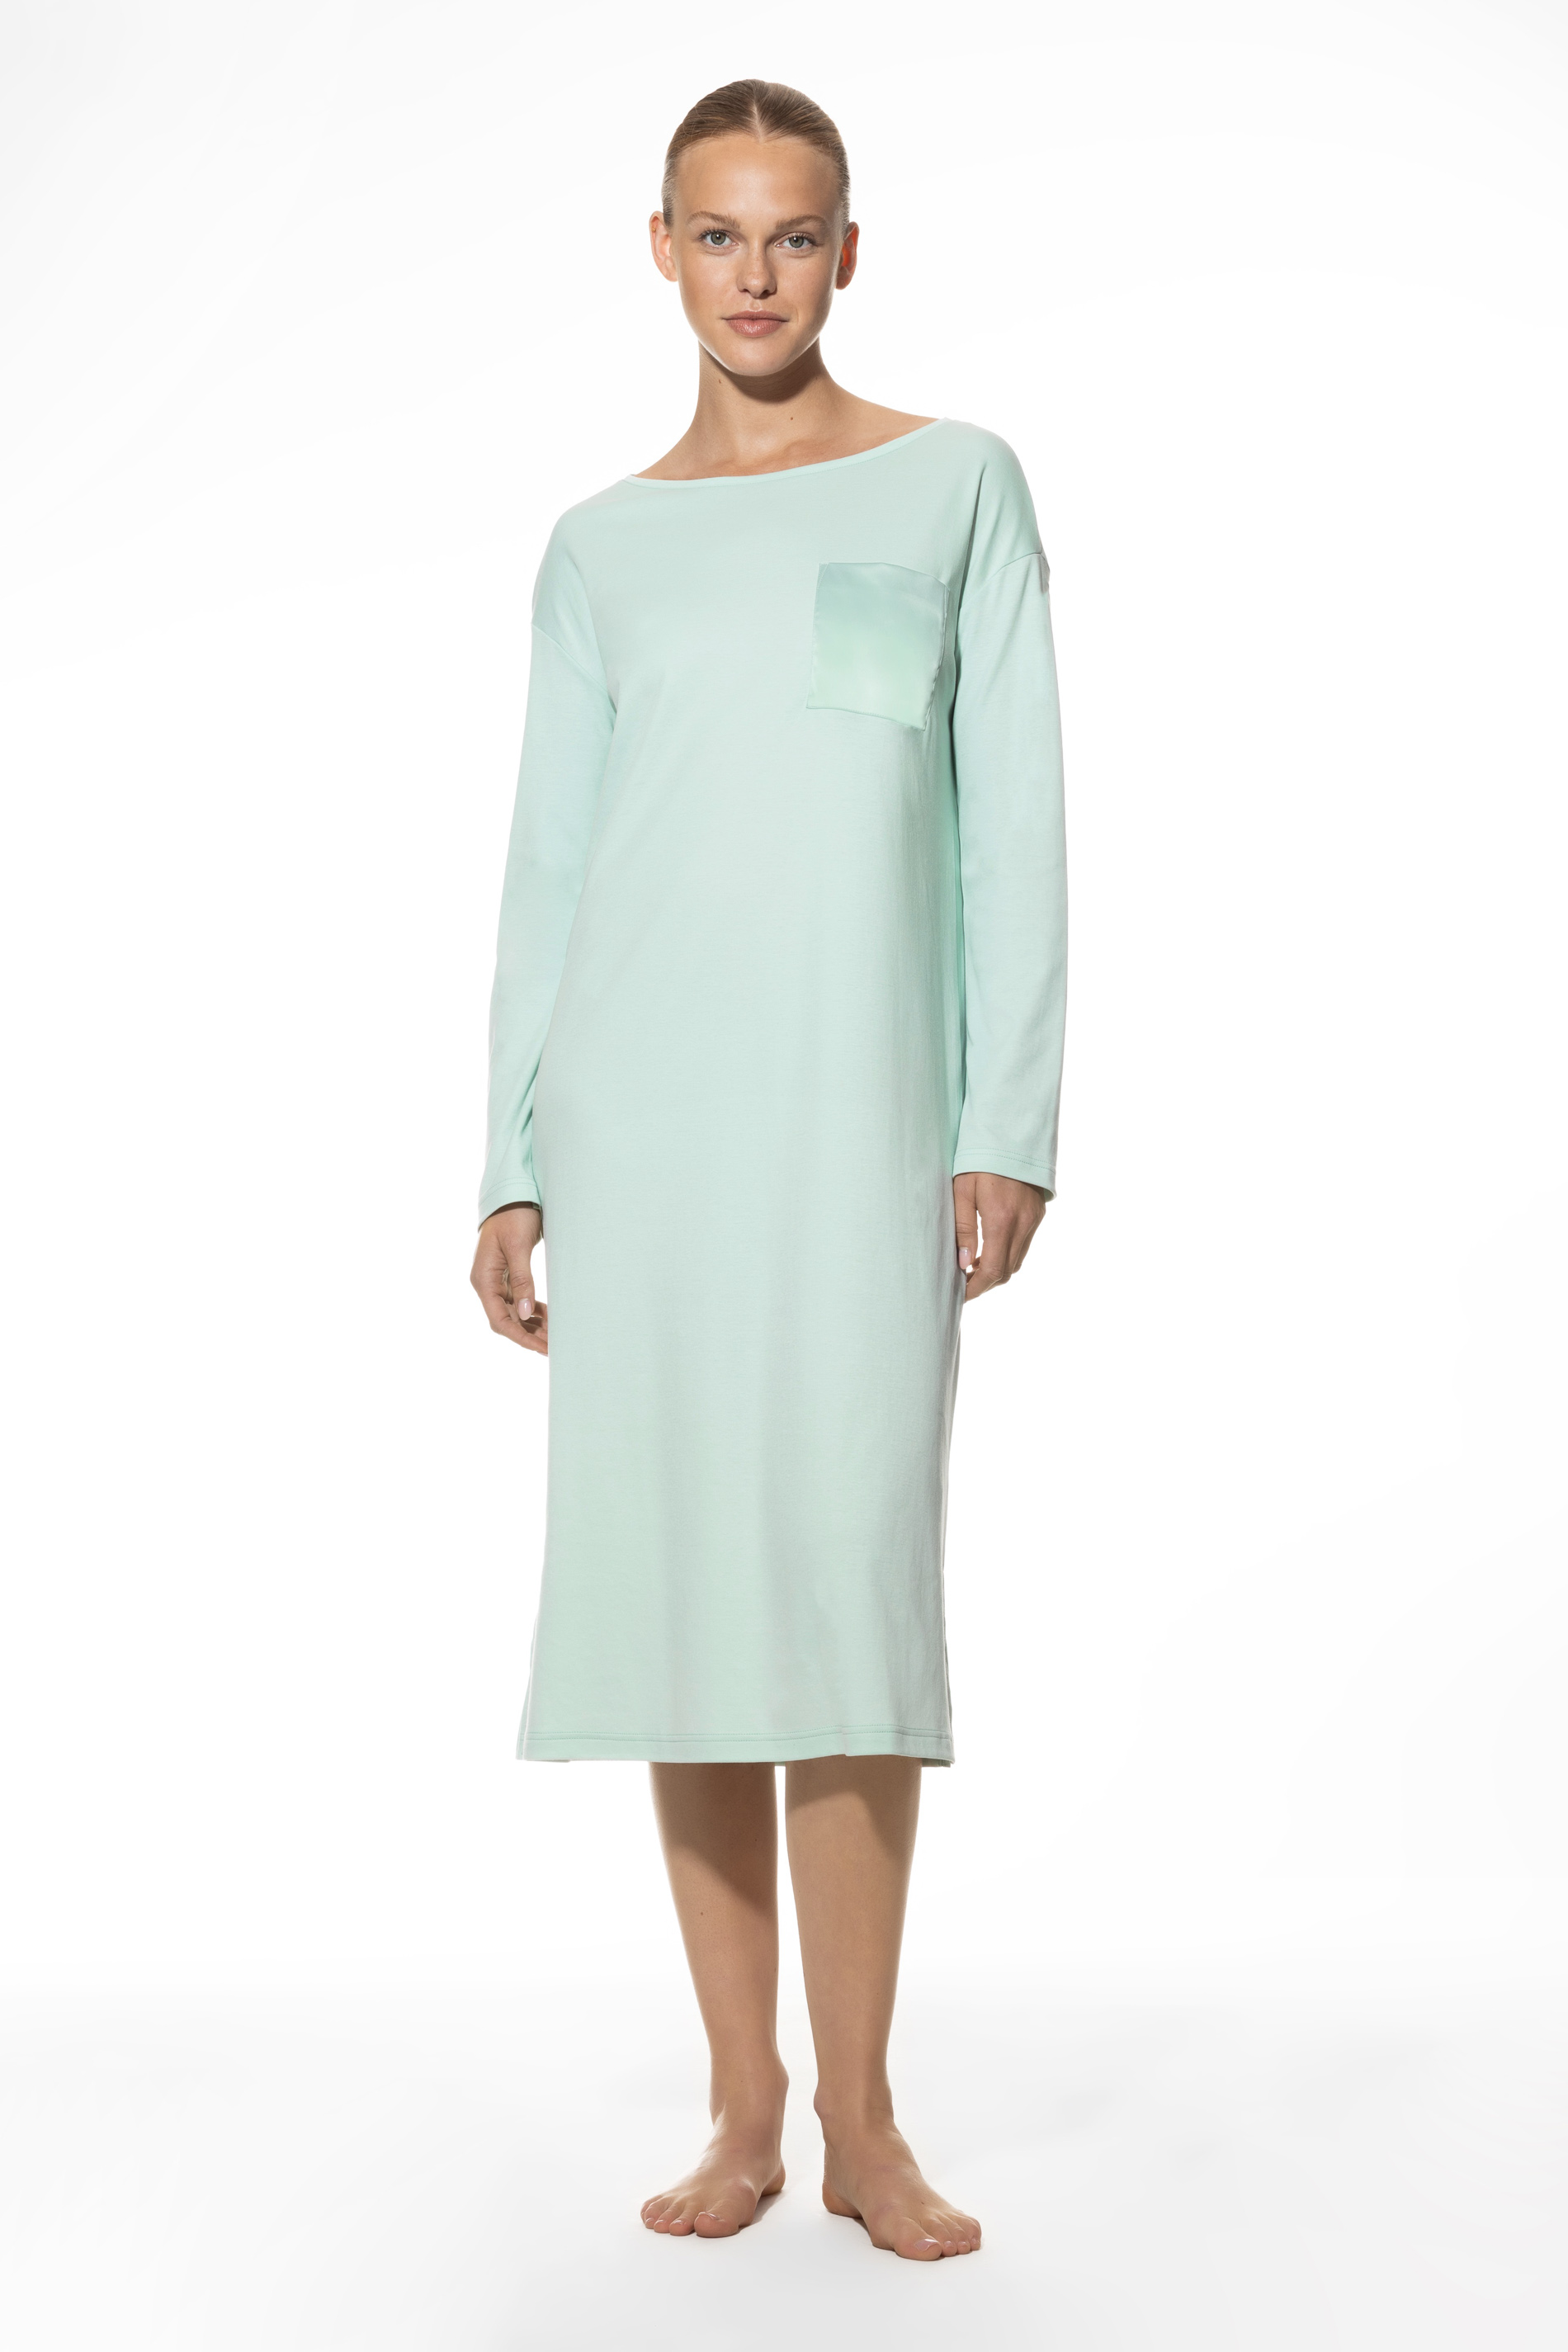 Nightshirt, long-sleeved Serie Malea Front View | mey®